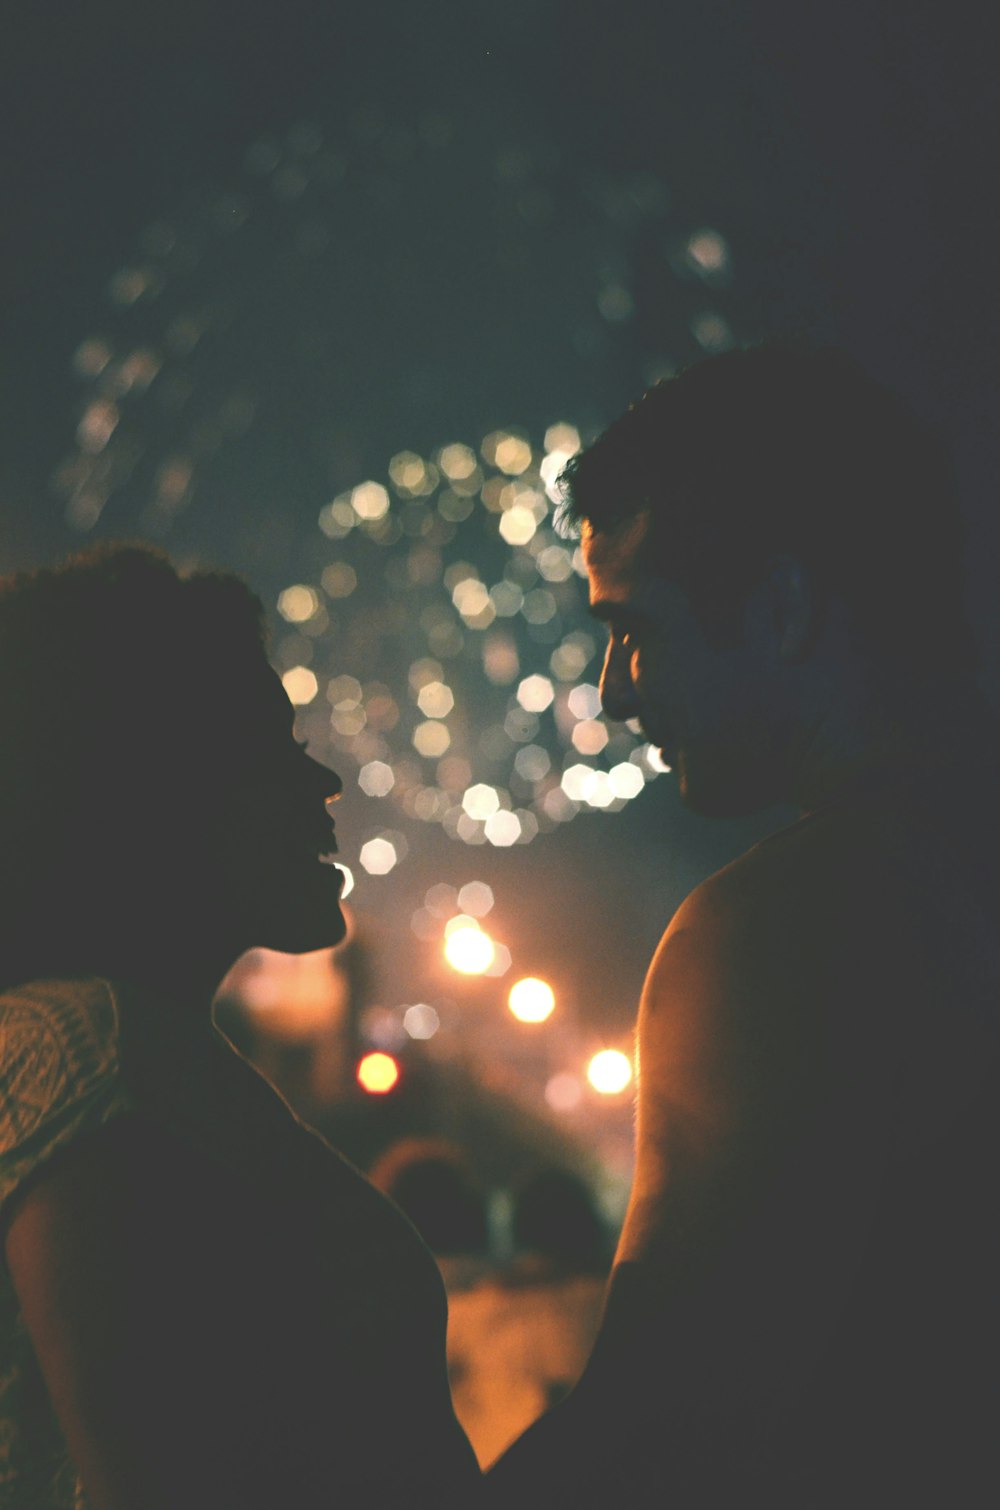 couple standing face to face at night with fireworks display